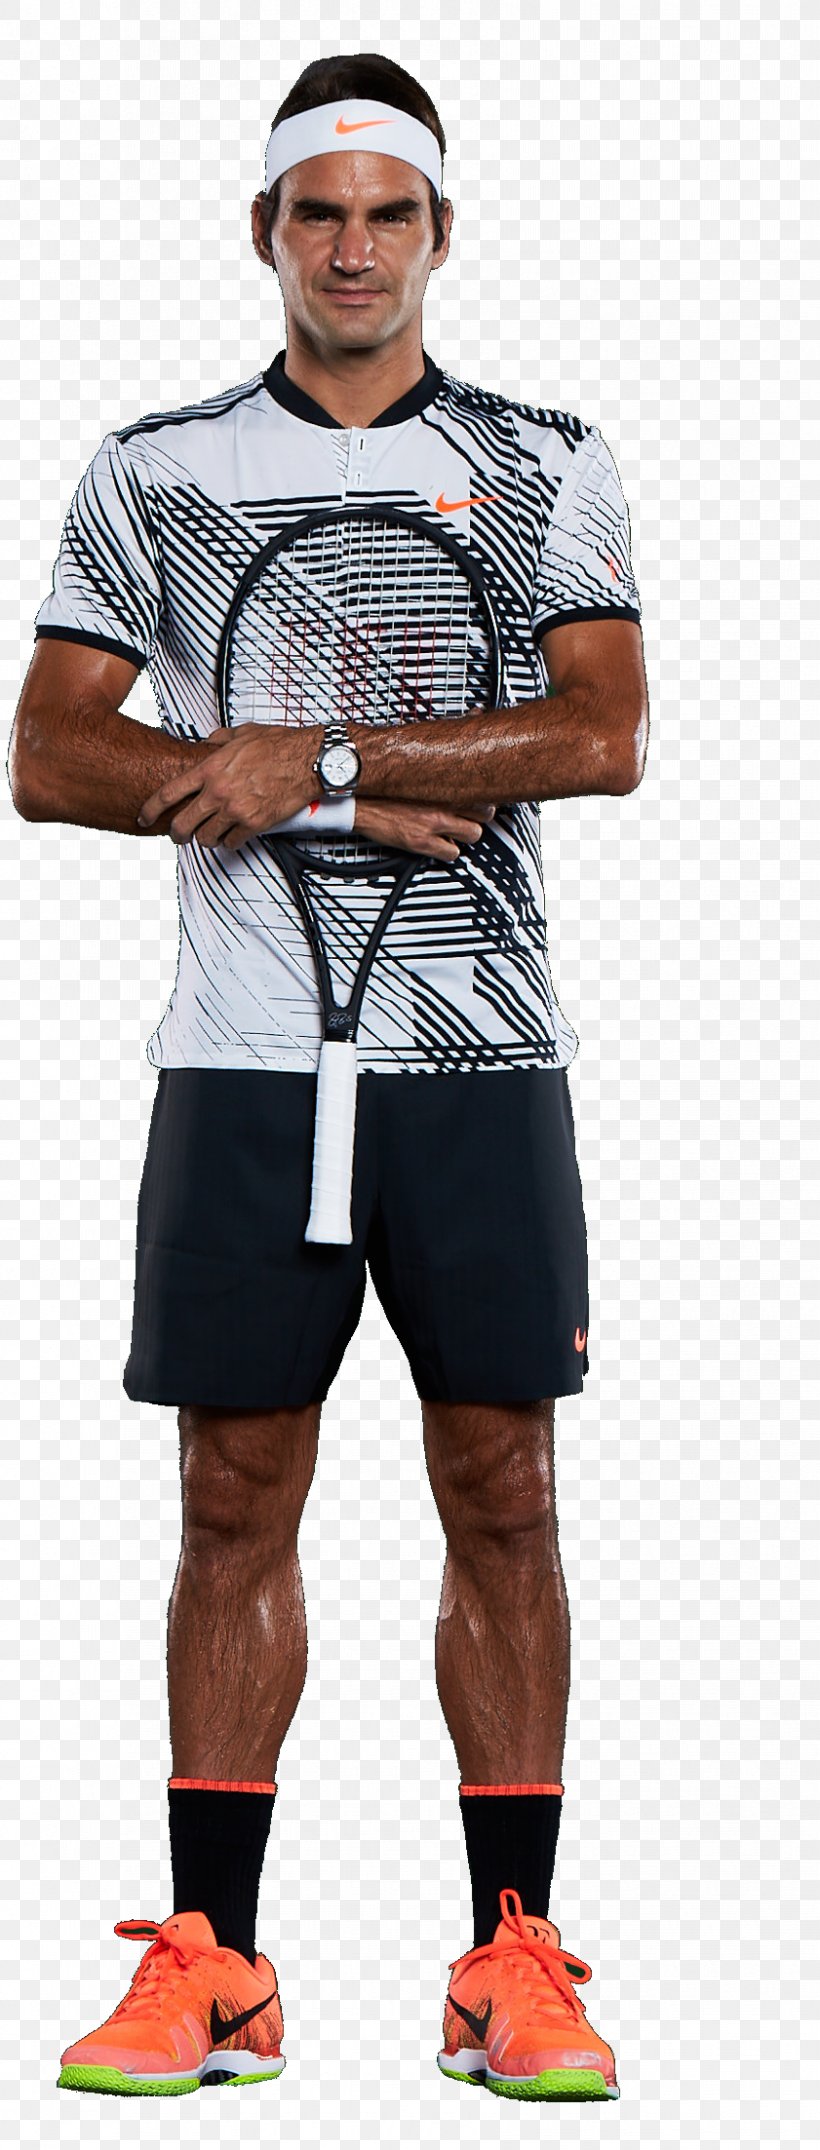 Roger Federer Foundation Australian Open 2017 Match For Africa And Joining Forces For The Benefit Of Children 2018 Roger Federer Tennis Season, PNG, 841x2206px, 2018 Roger Federer Tennis Season, Roger Federer, Arm, Association Of Tennis Professionals, Australian Open Download Free